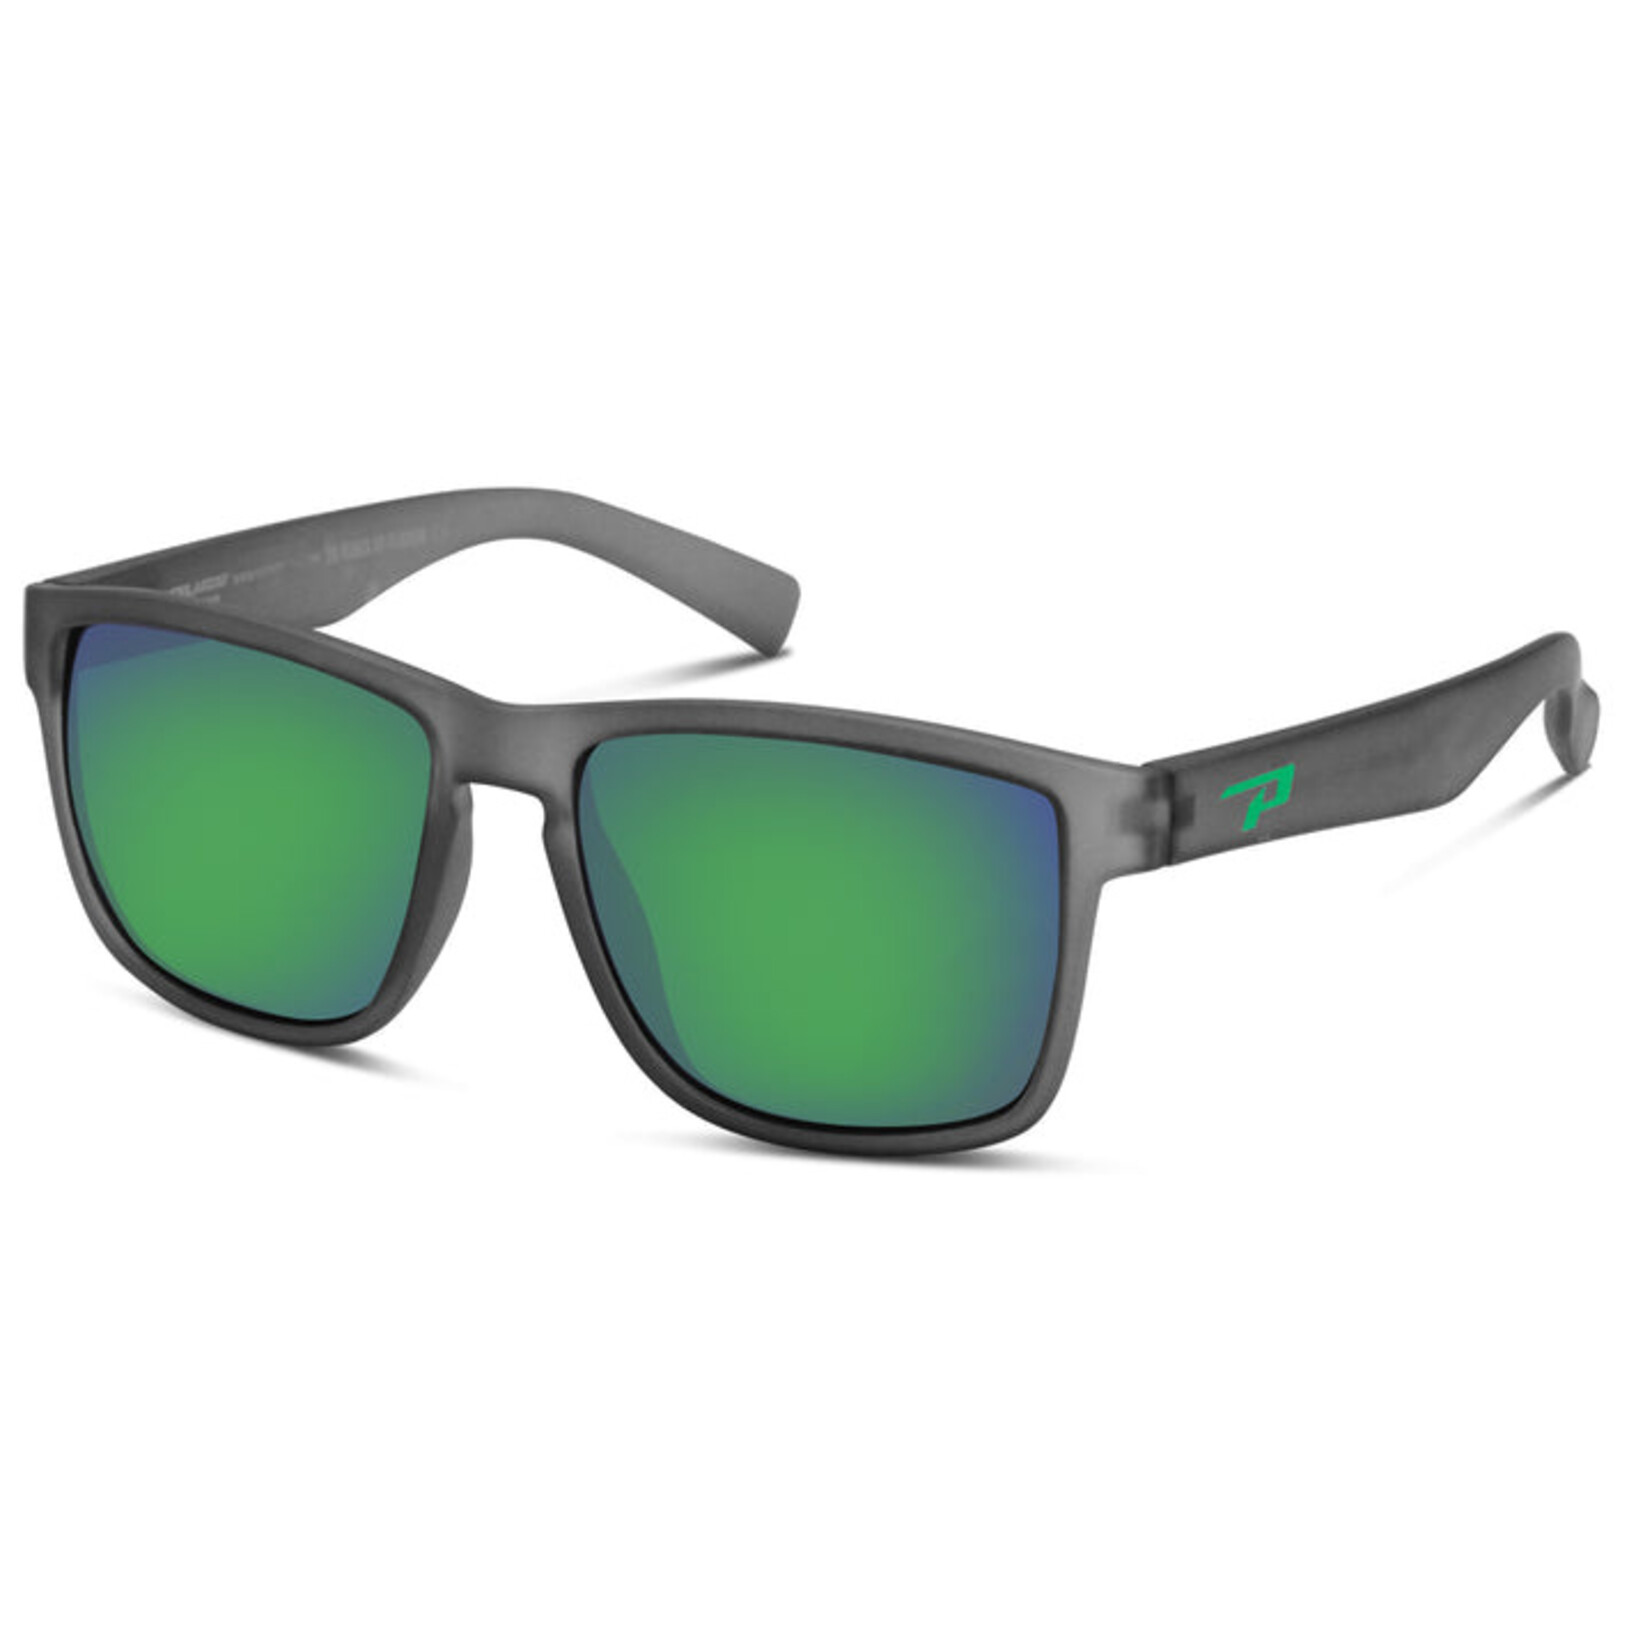 PEPPERS LONG POINTE - FROSTED GREY W/ GREEN MIRROR POLARIZED